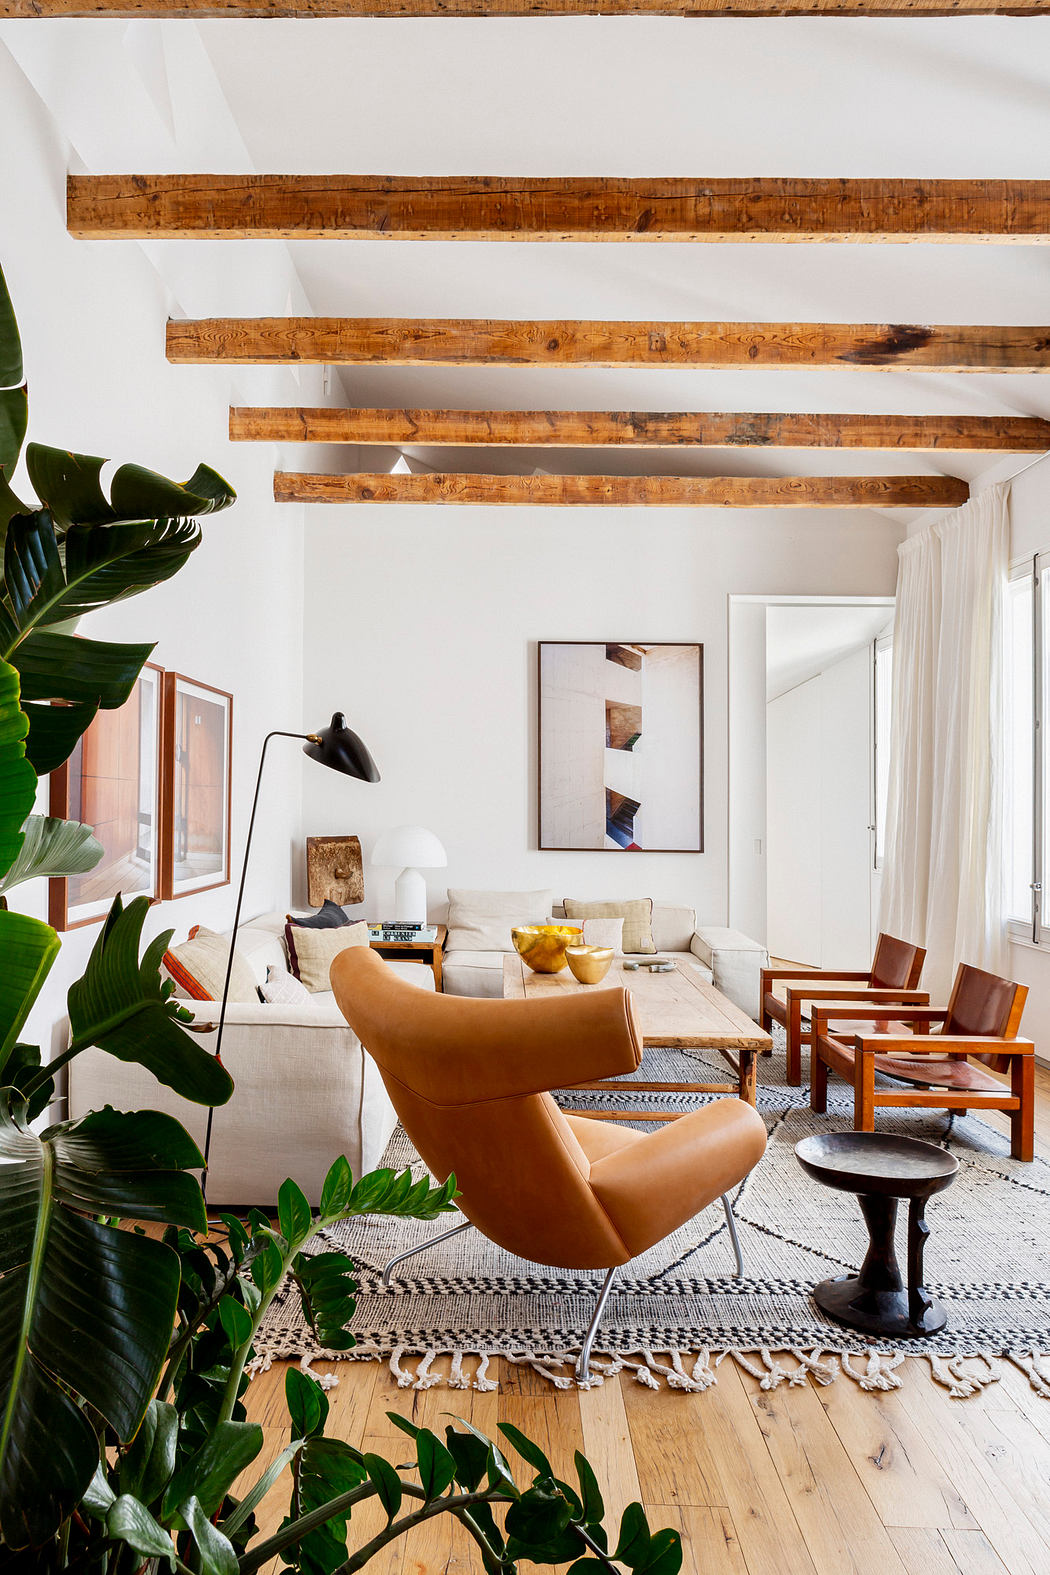 Modern living room with exposed wooden beams and stylish furniture.